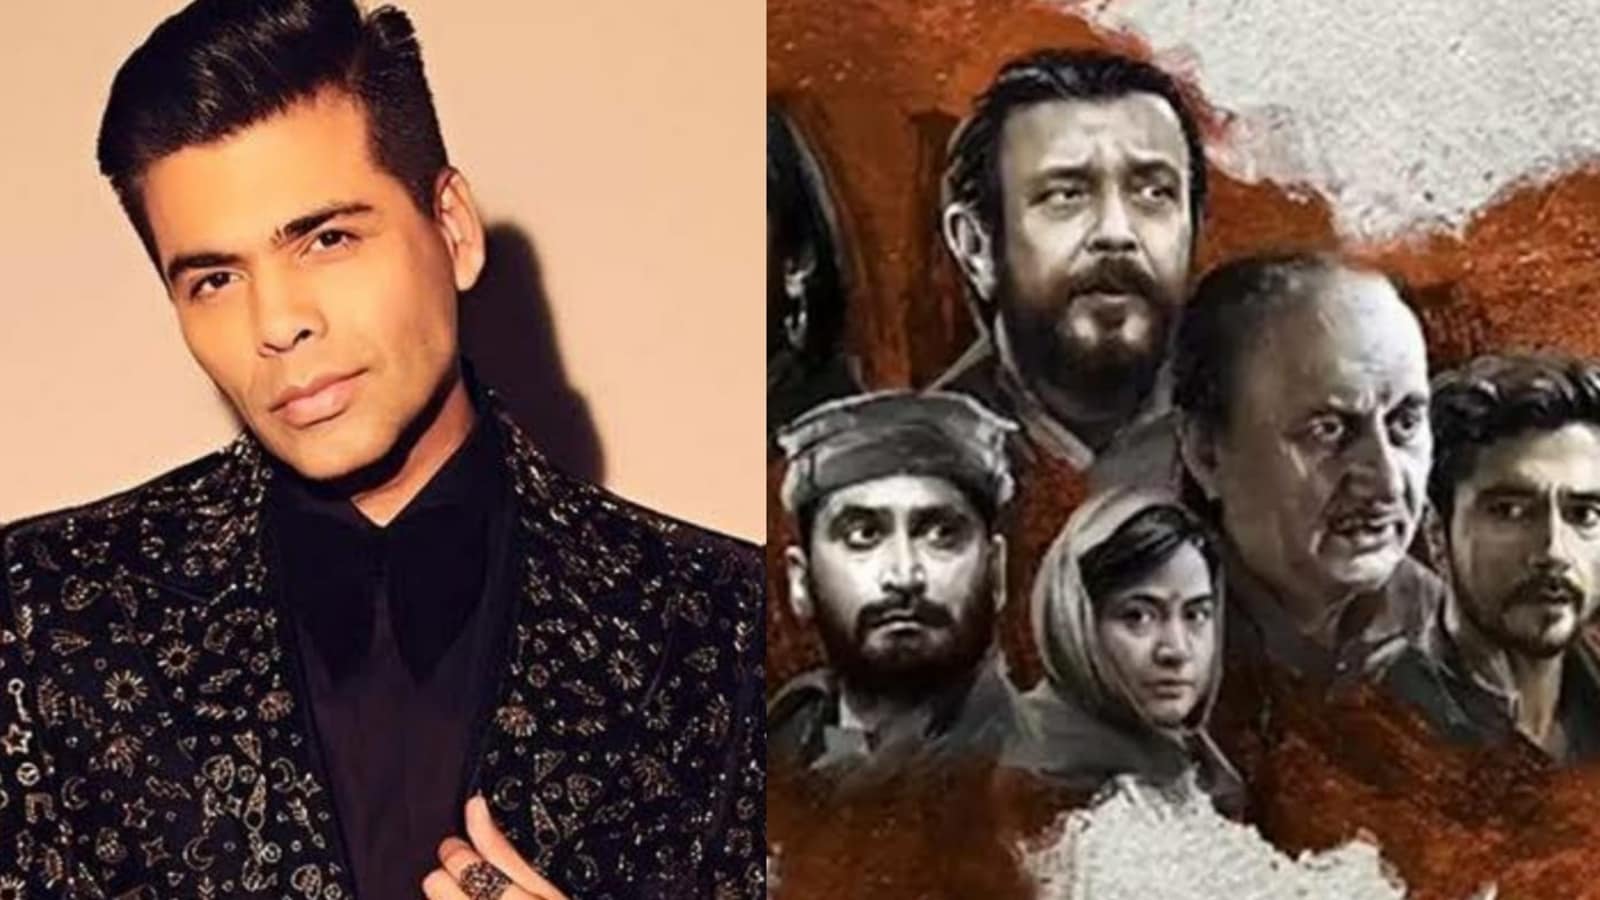 Karan Johar says The Kashmir Files is no longer a film but a movement: ‘You have to watch it to learn from it’